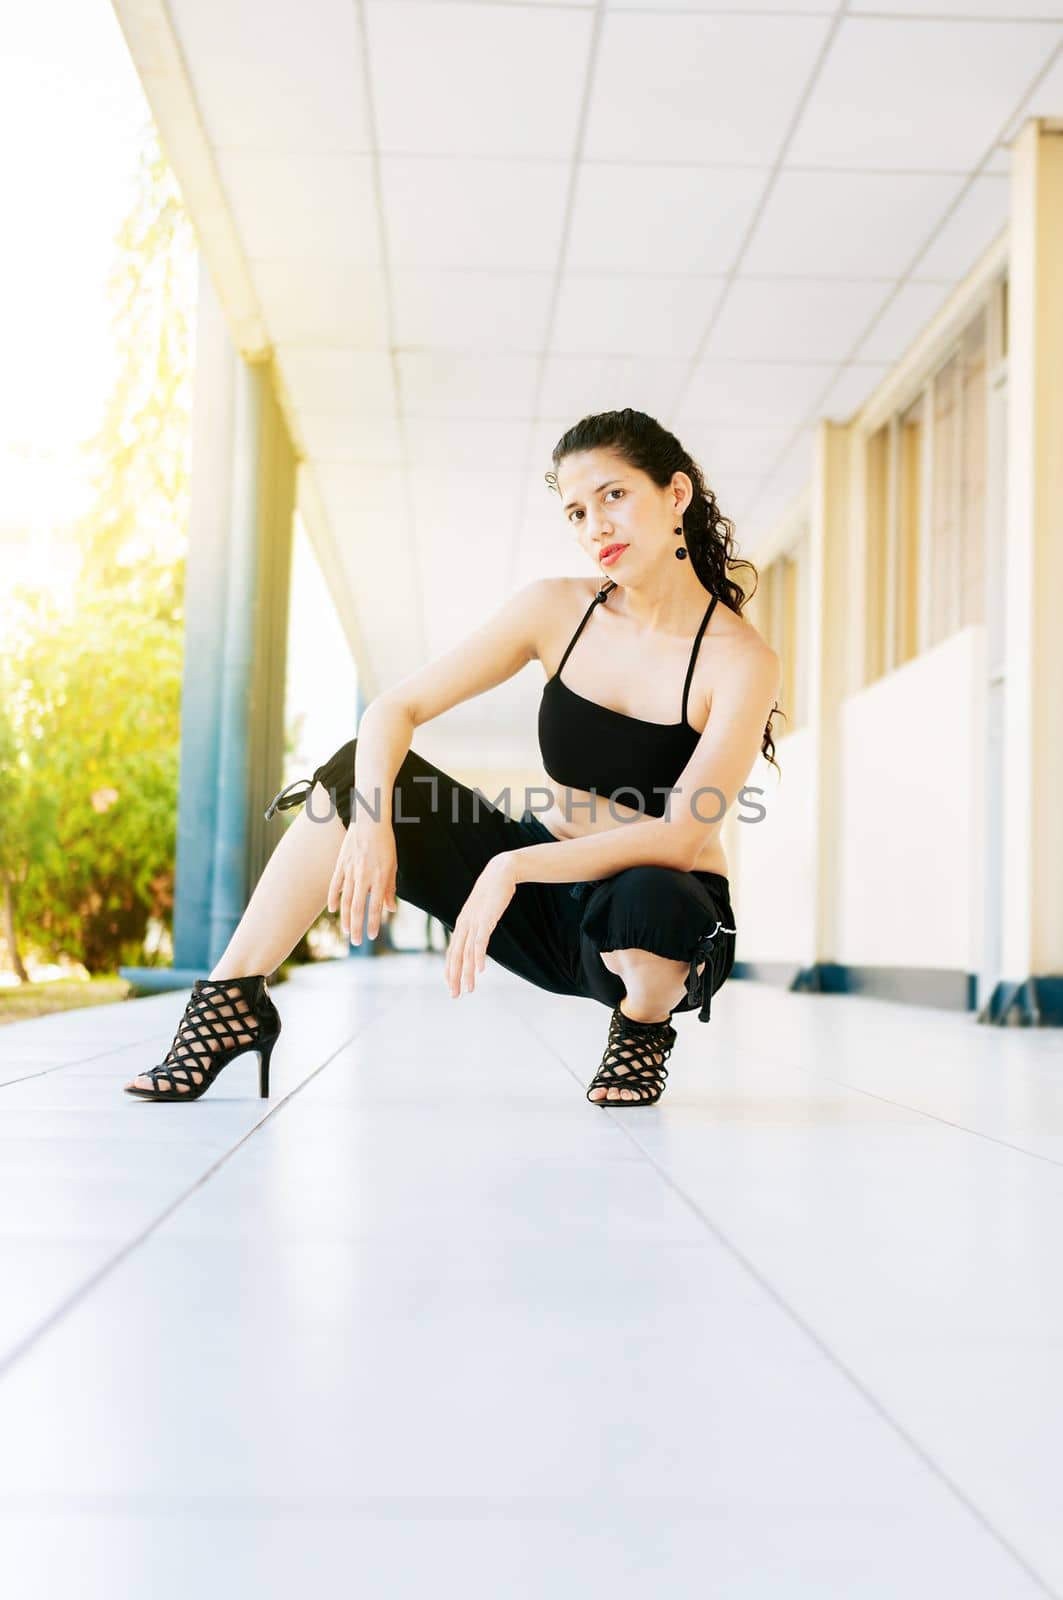 Dance artist woman in high heels outdoors. Portrait of dance girl in high heels crouching on the floor. Portrait of dancer Woman in heels on the floor looking at the camera.